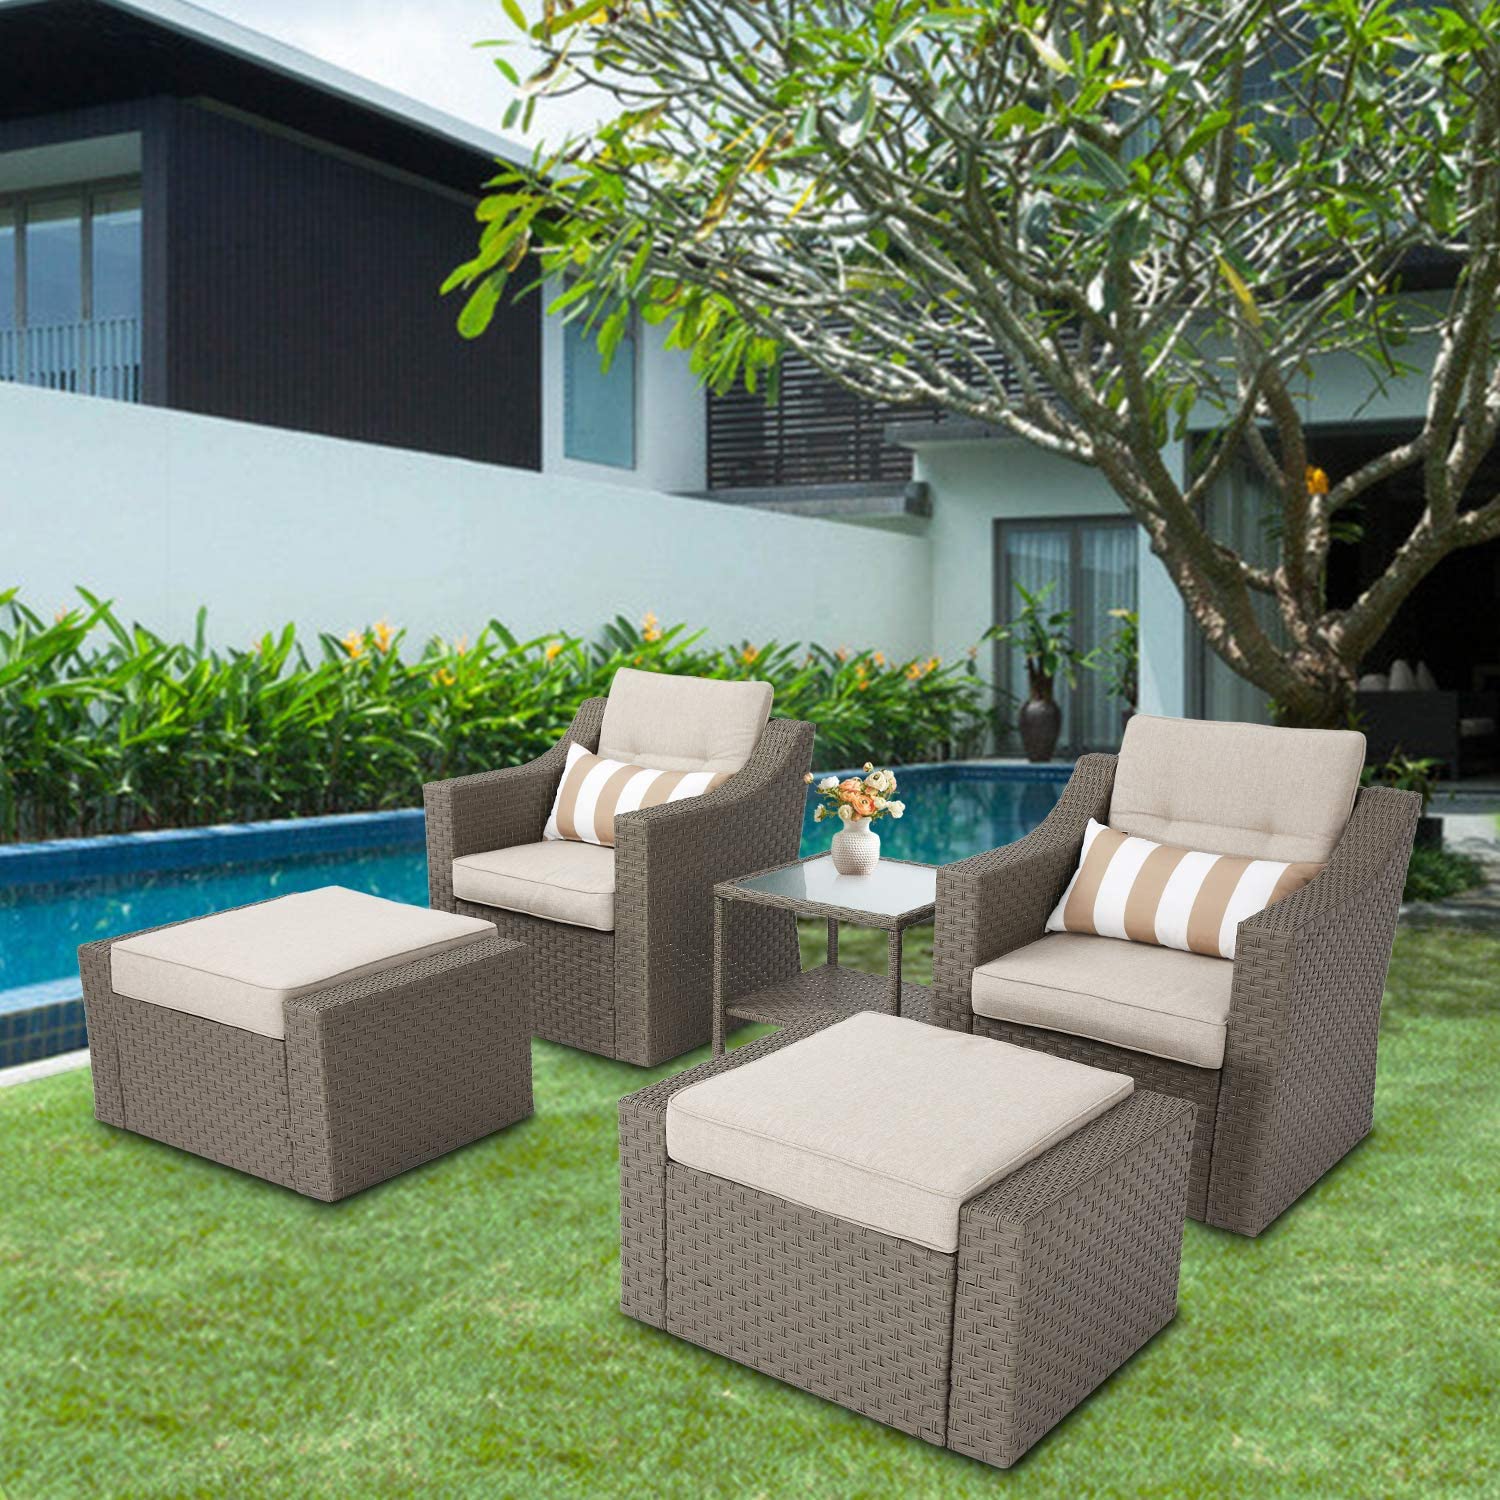 SUNCROWN 5-Piece Outdoor Patio Conversation Set Wicker Furniture Sofa Set for 2 with Table and Ottomans, Neutral Beige - image 2 of 7